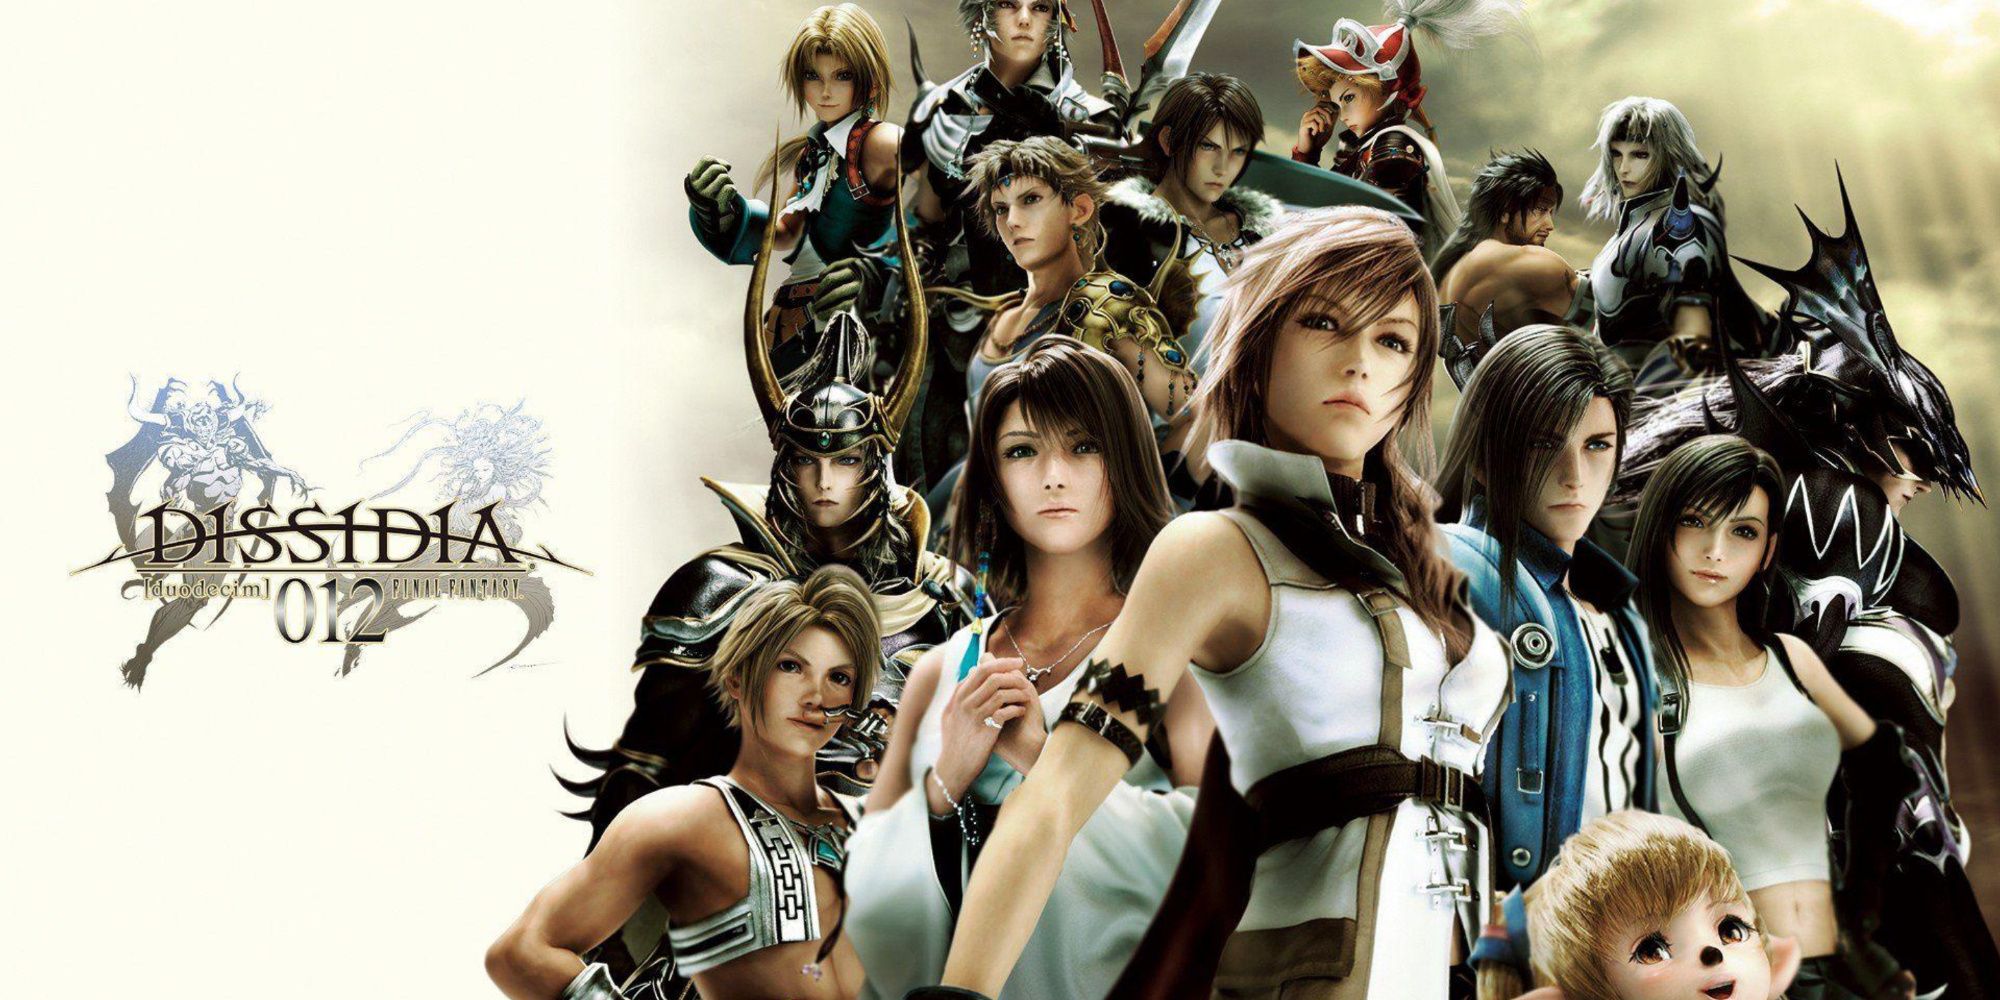 Promo art featuring characters in Dissidia 012 Final Fantasy